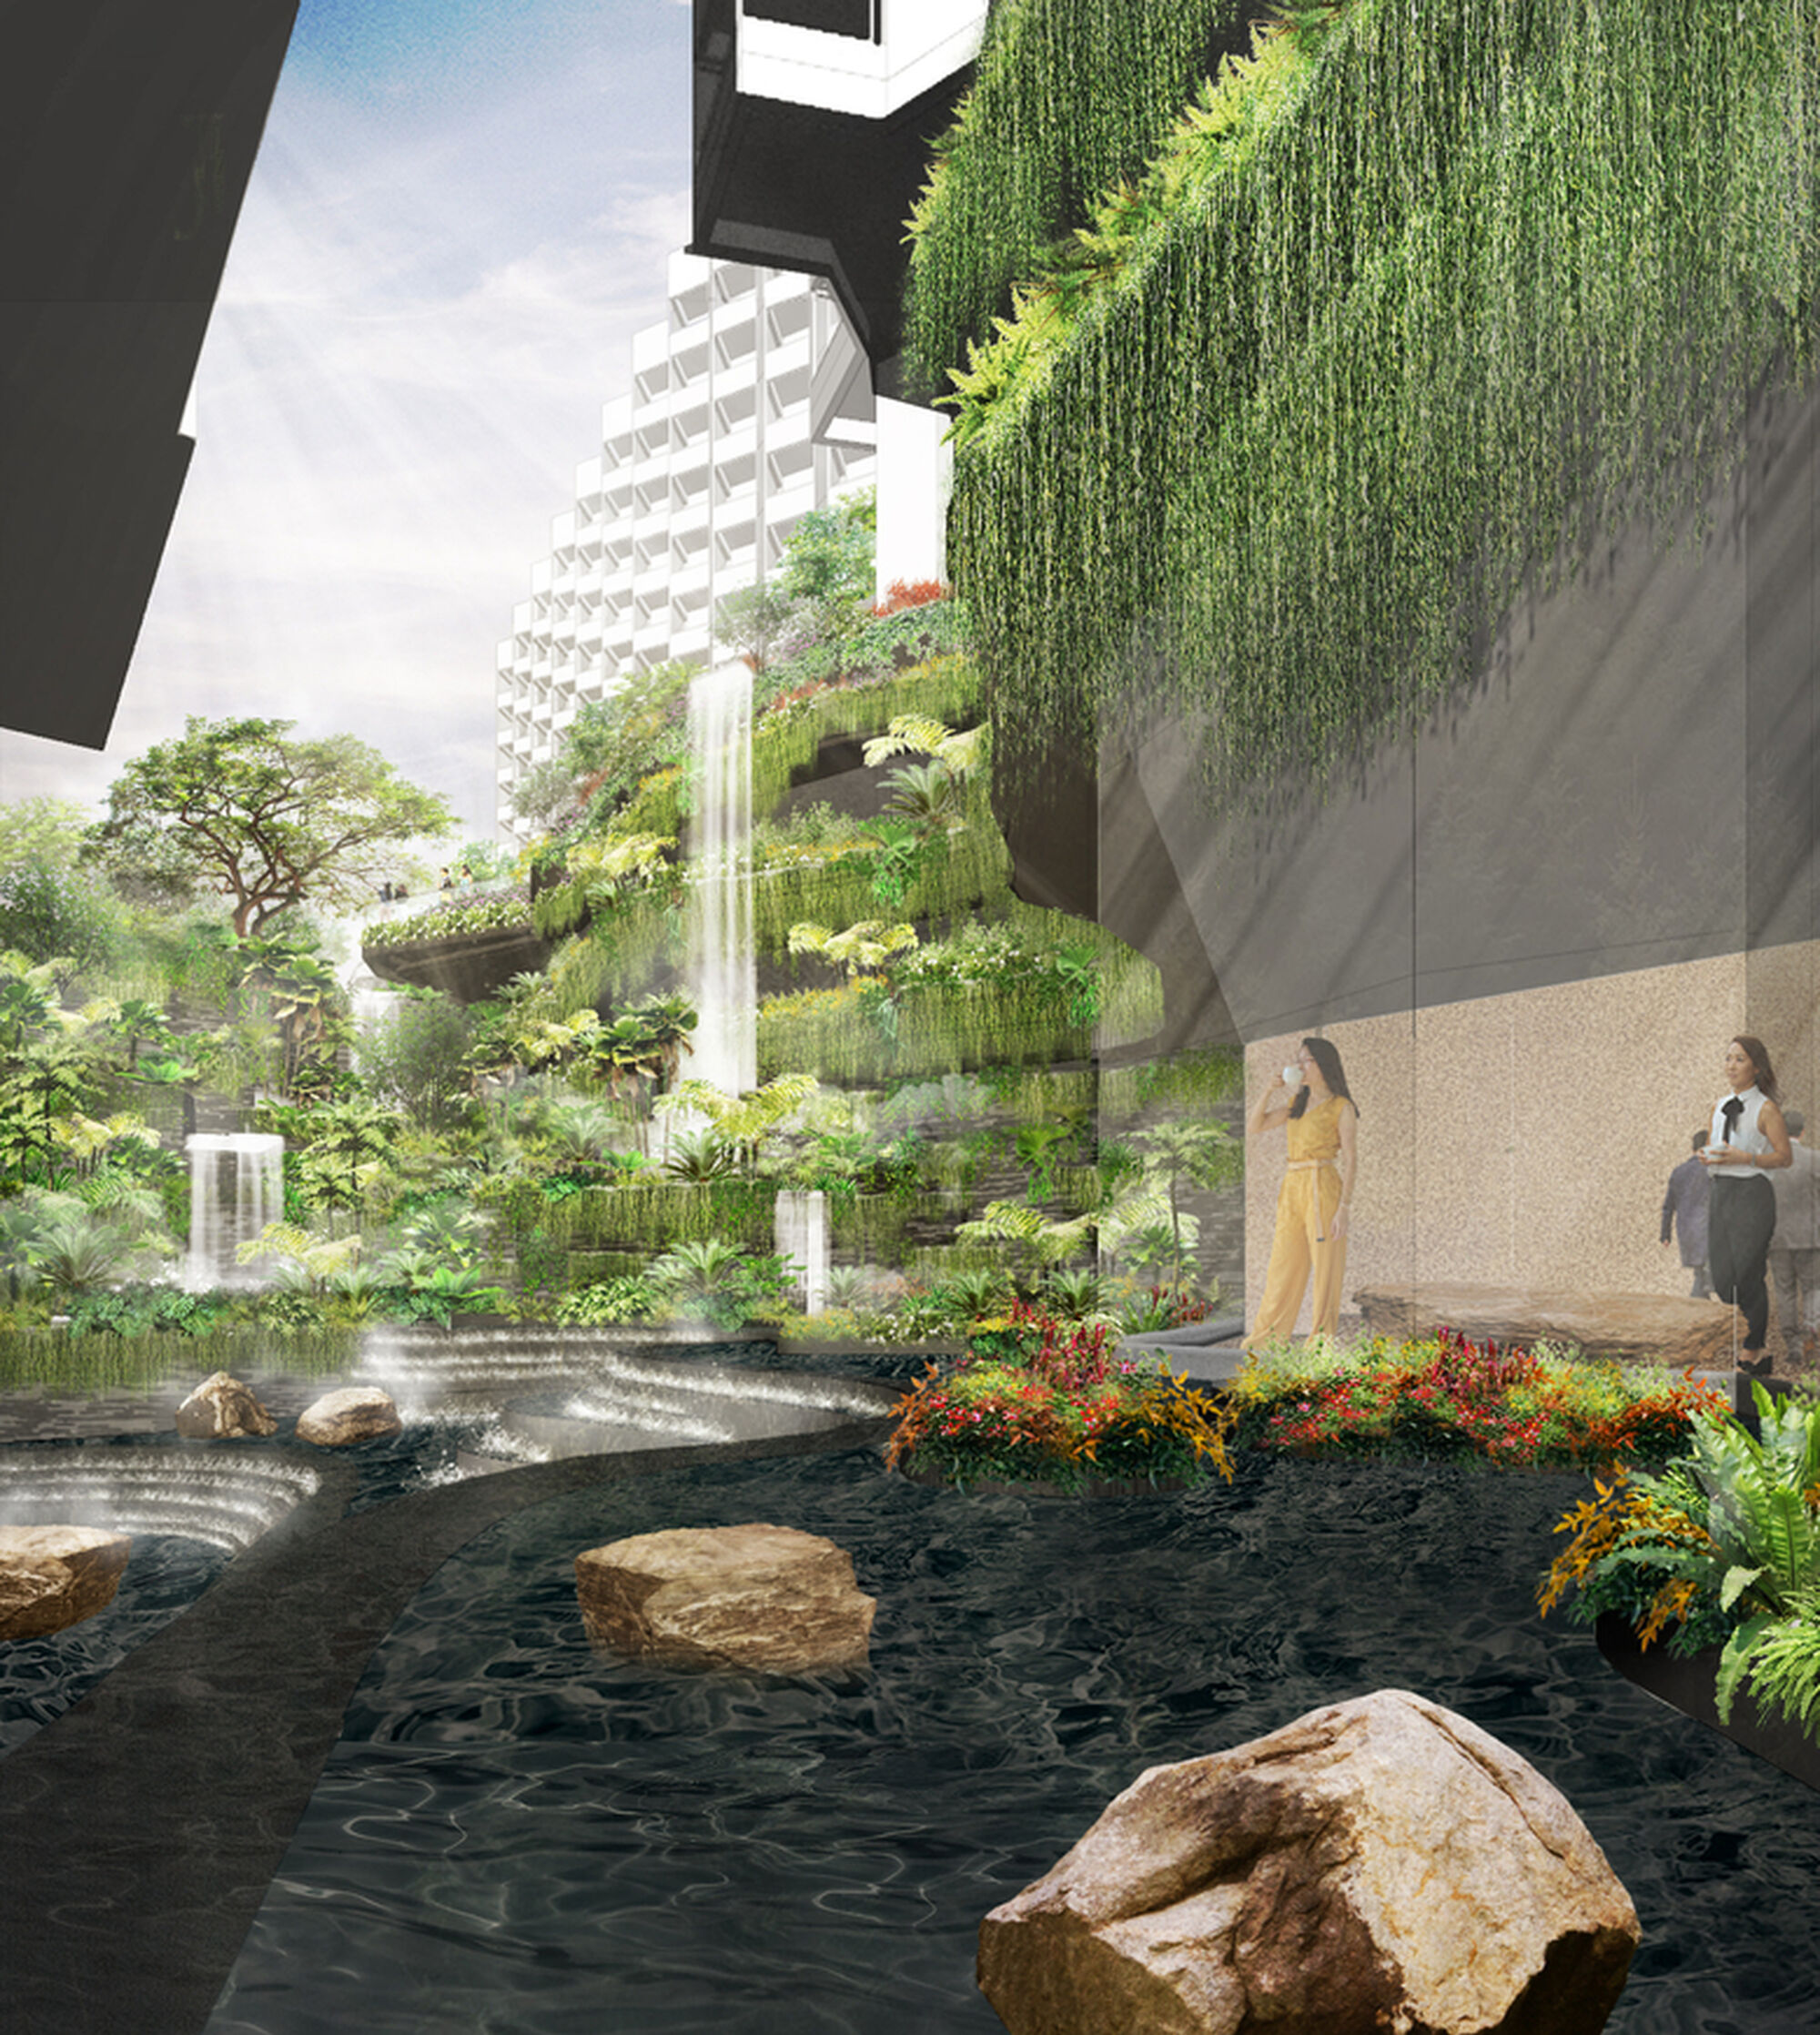 Grand Hyatt Singapore marks 50 years with nature-led wellness spaces and urban landscaping